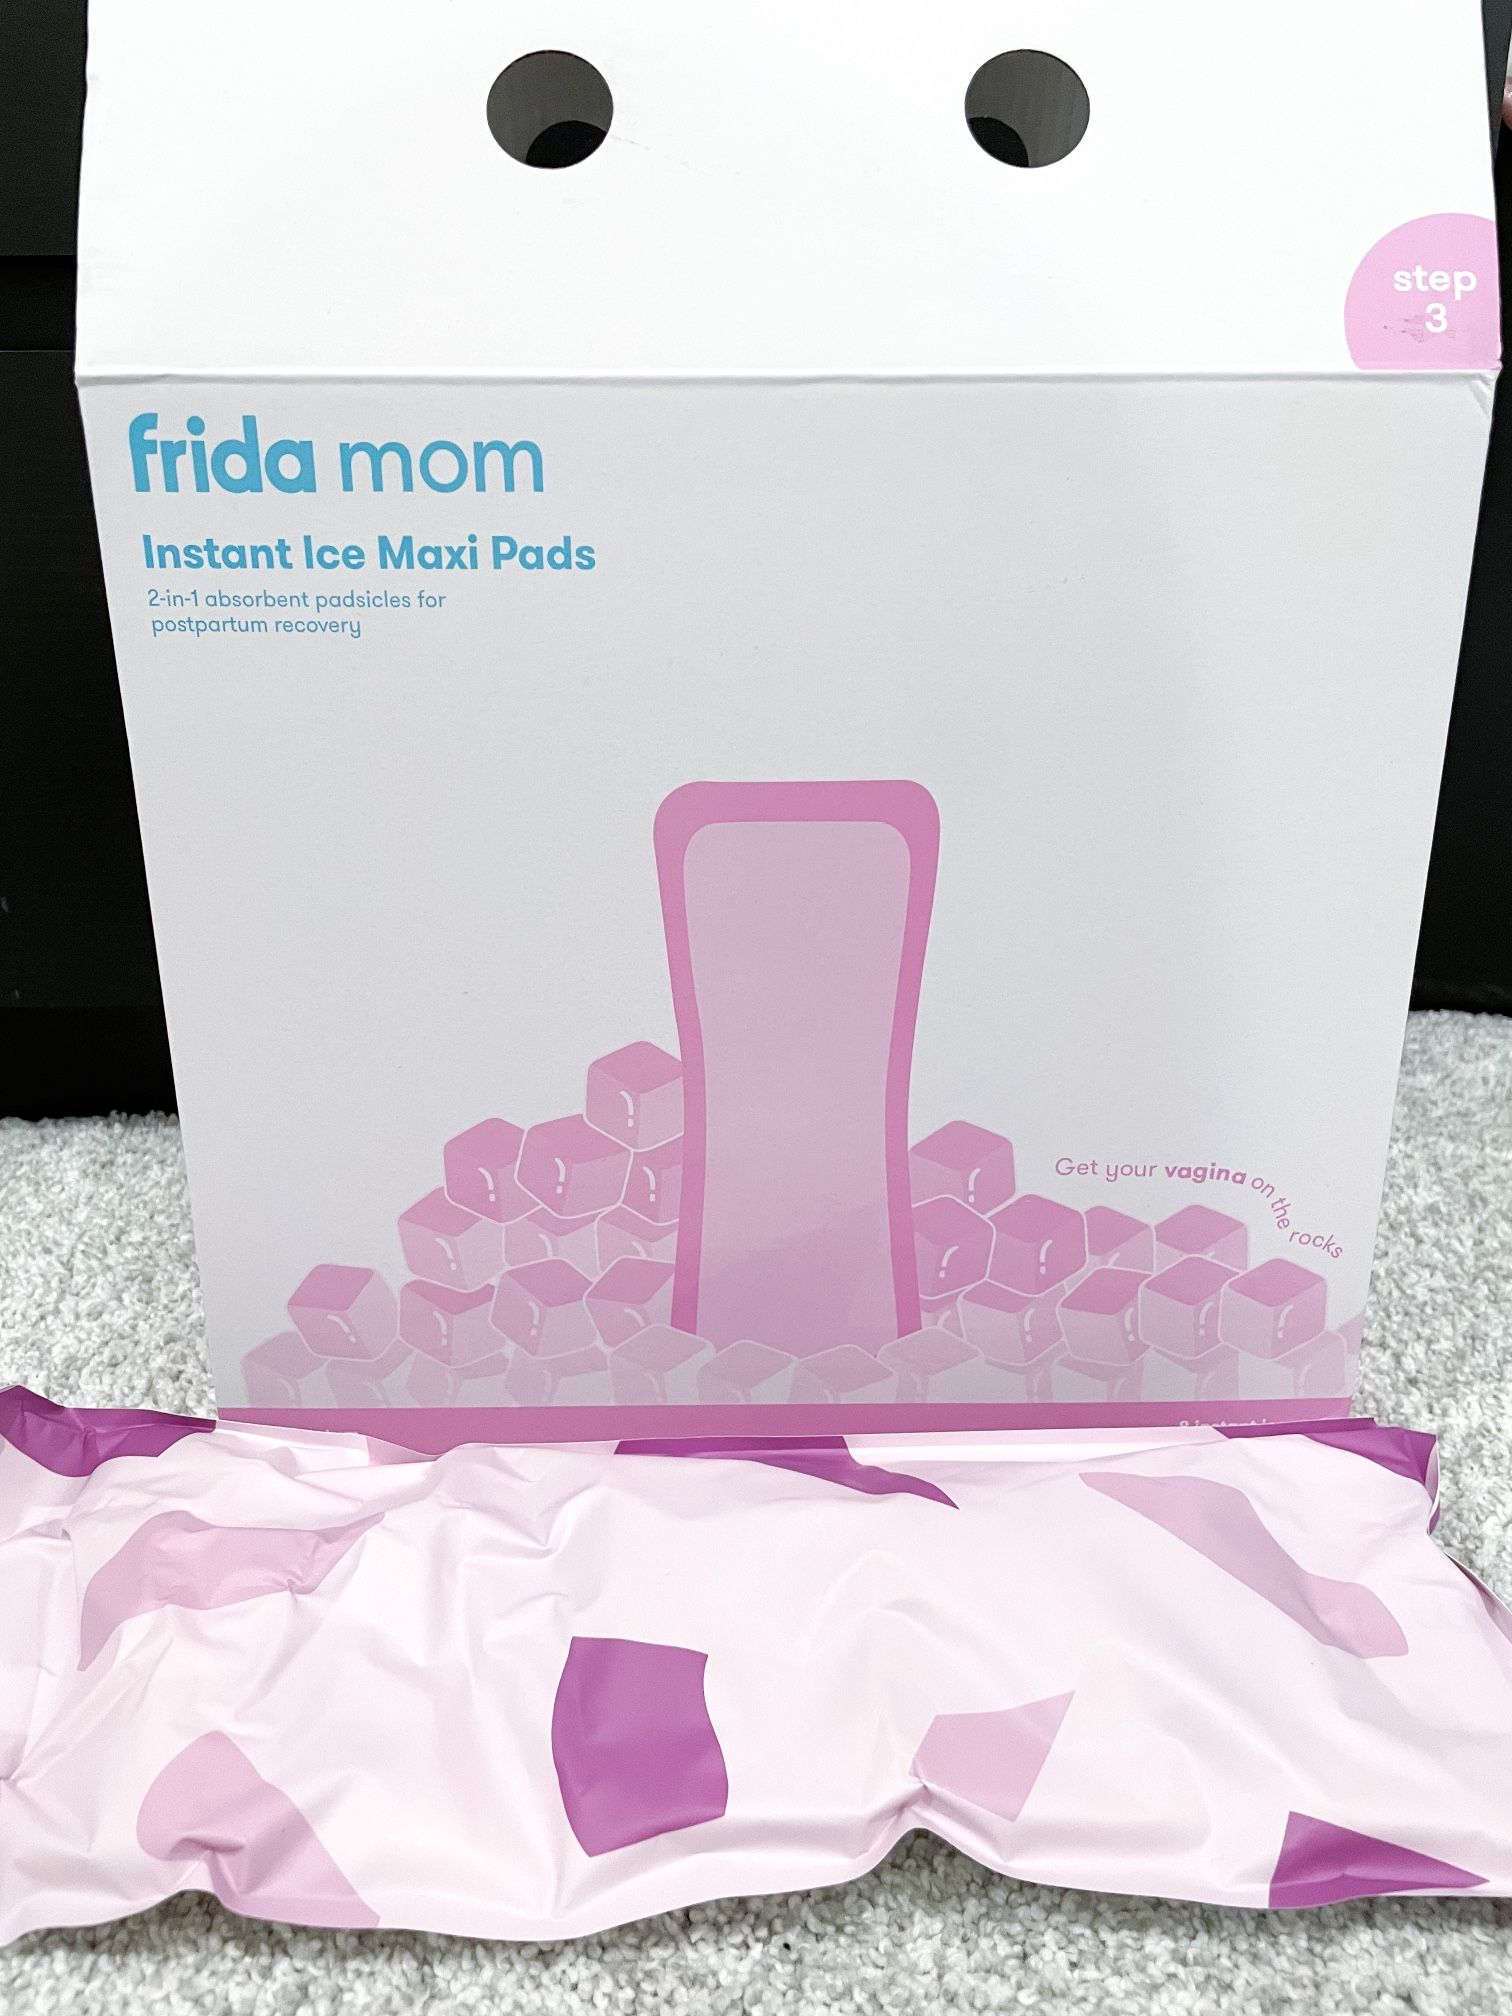 frida mom instant ice maxi pads for Sale in Chino Hills, CA - OfferUp